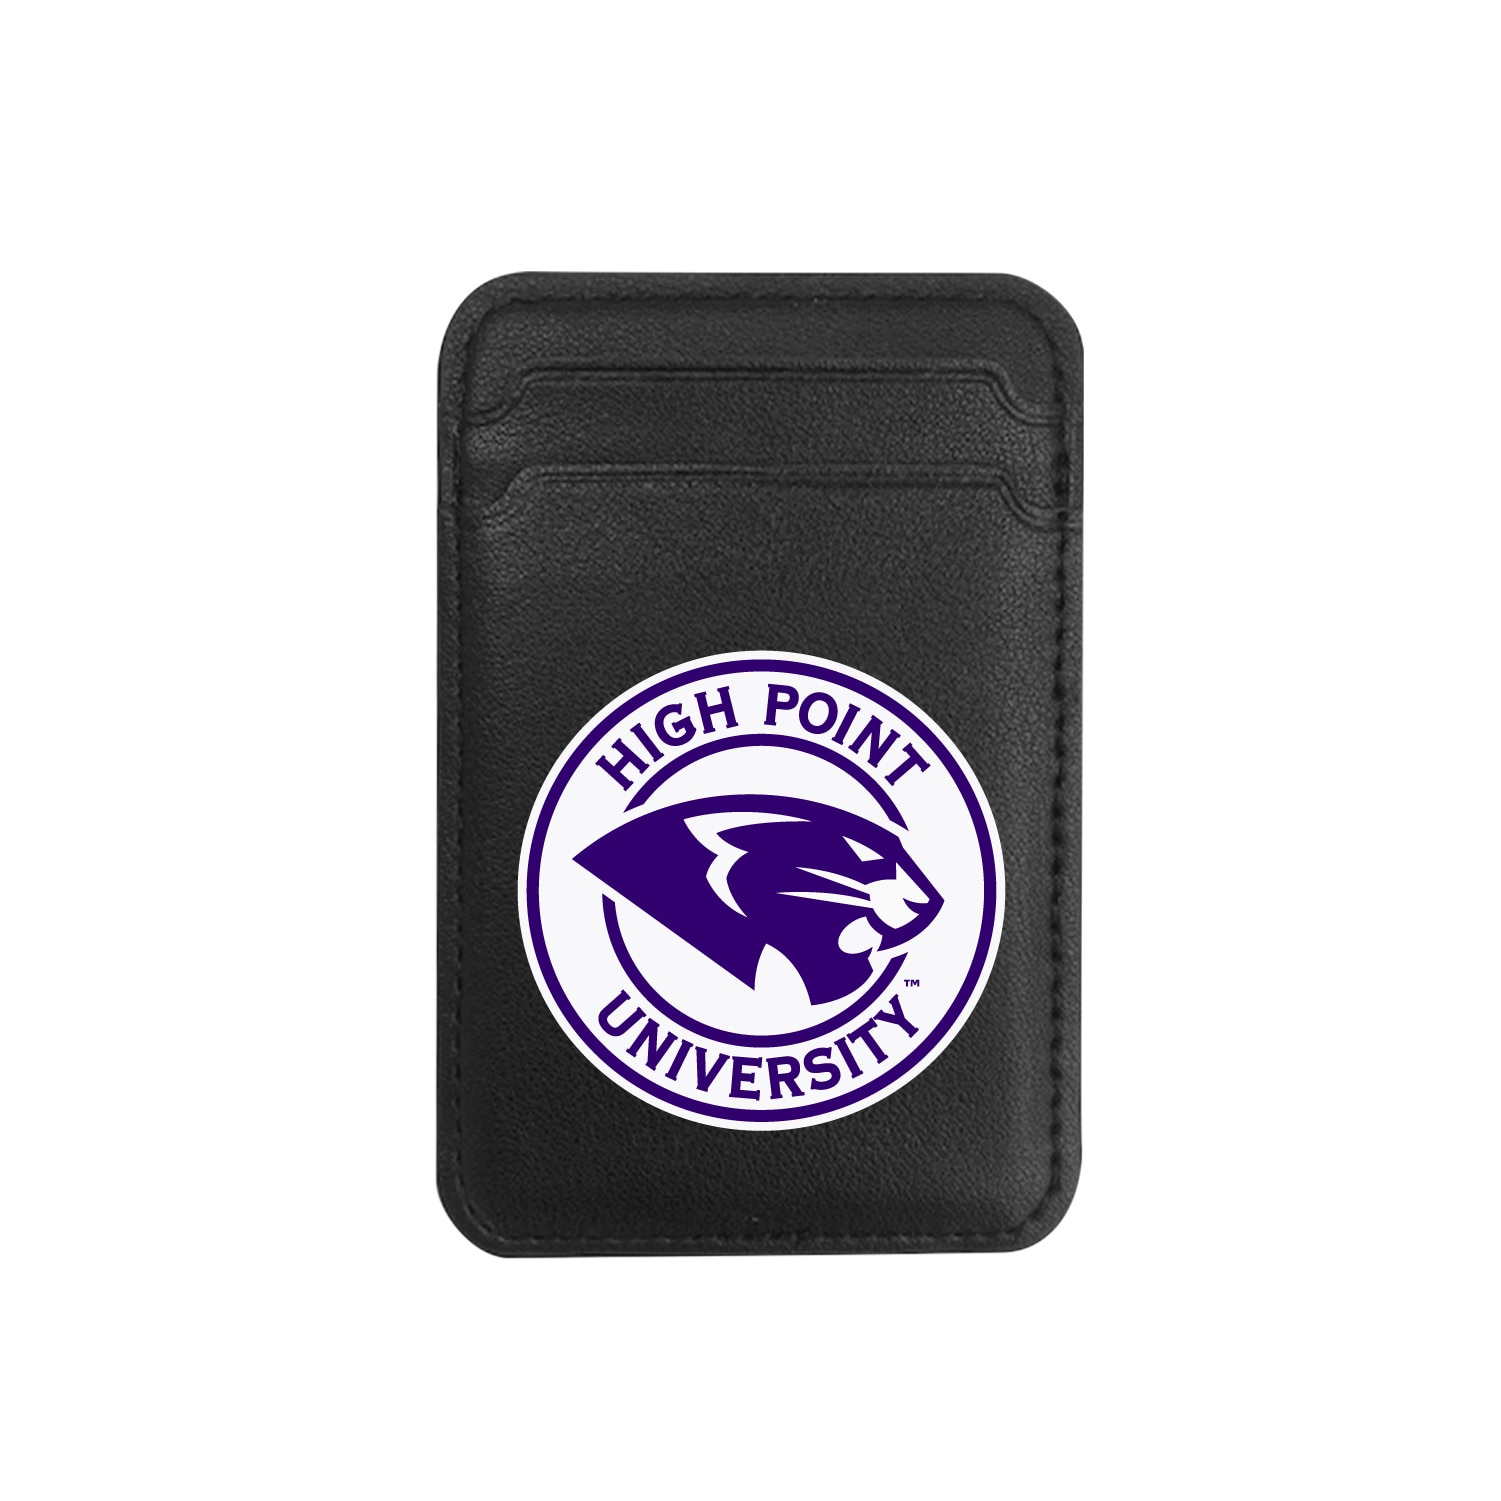 High Point University - Leather Wallet Sleeve (Top Load, Mag Safe), Black, Classic V1